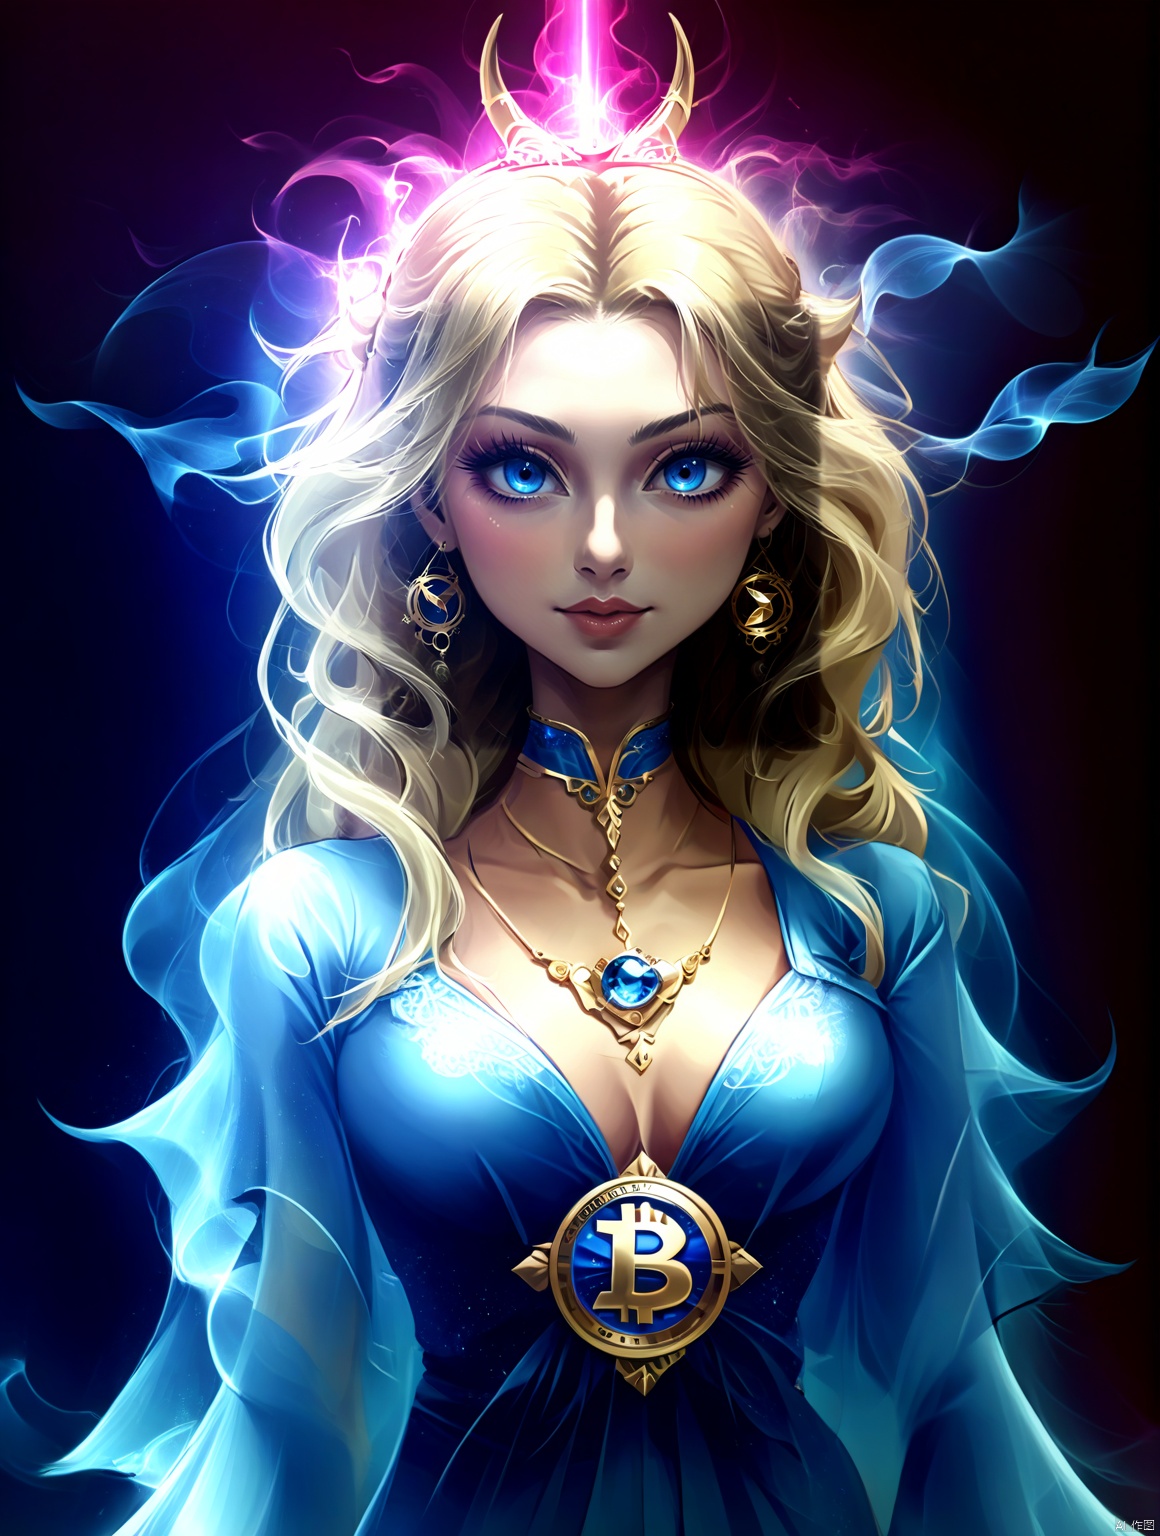  andpowerful,producing thebest quality pictures with mysterious power,to GammaKnownforScalyand shining cosmic eyes can release laser and unique mixed gamma rays,she guidesthe growth and progress of the crypto field with wisdom and power,her flightis the protection and inspiration for the future of the kingdom,her presencemakes the entire crypto world stand firm in the change